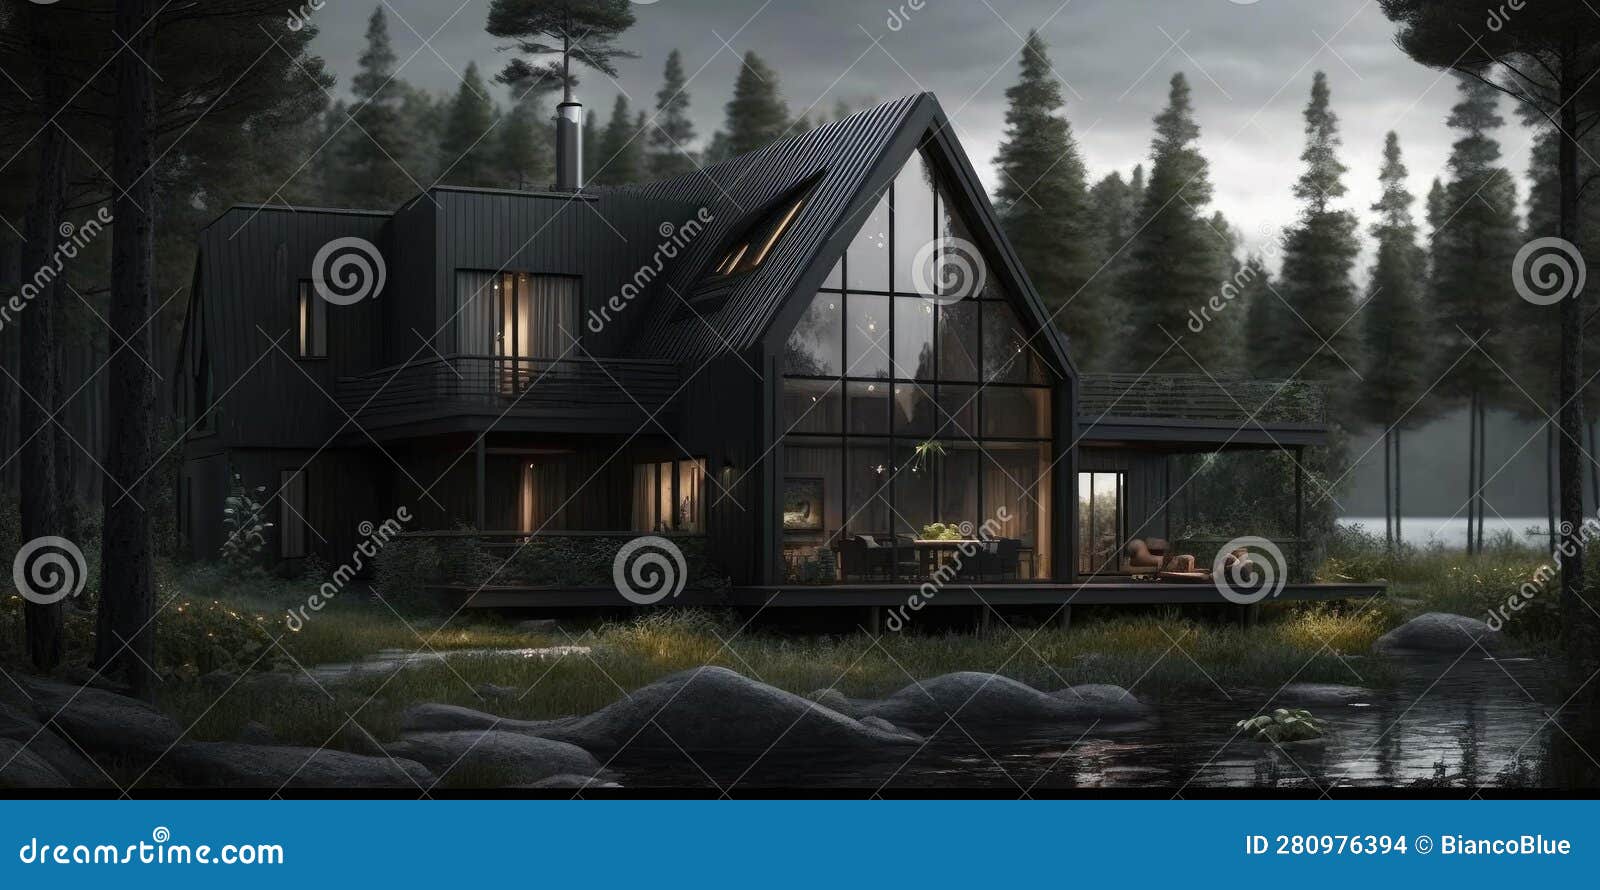 luxurious scandinavian nordic home in the forest in evening scene